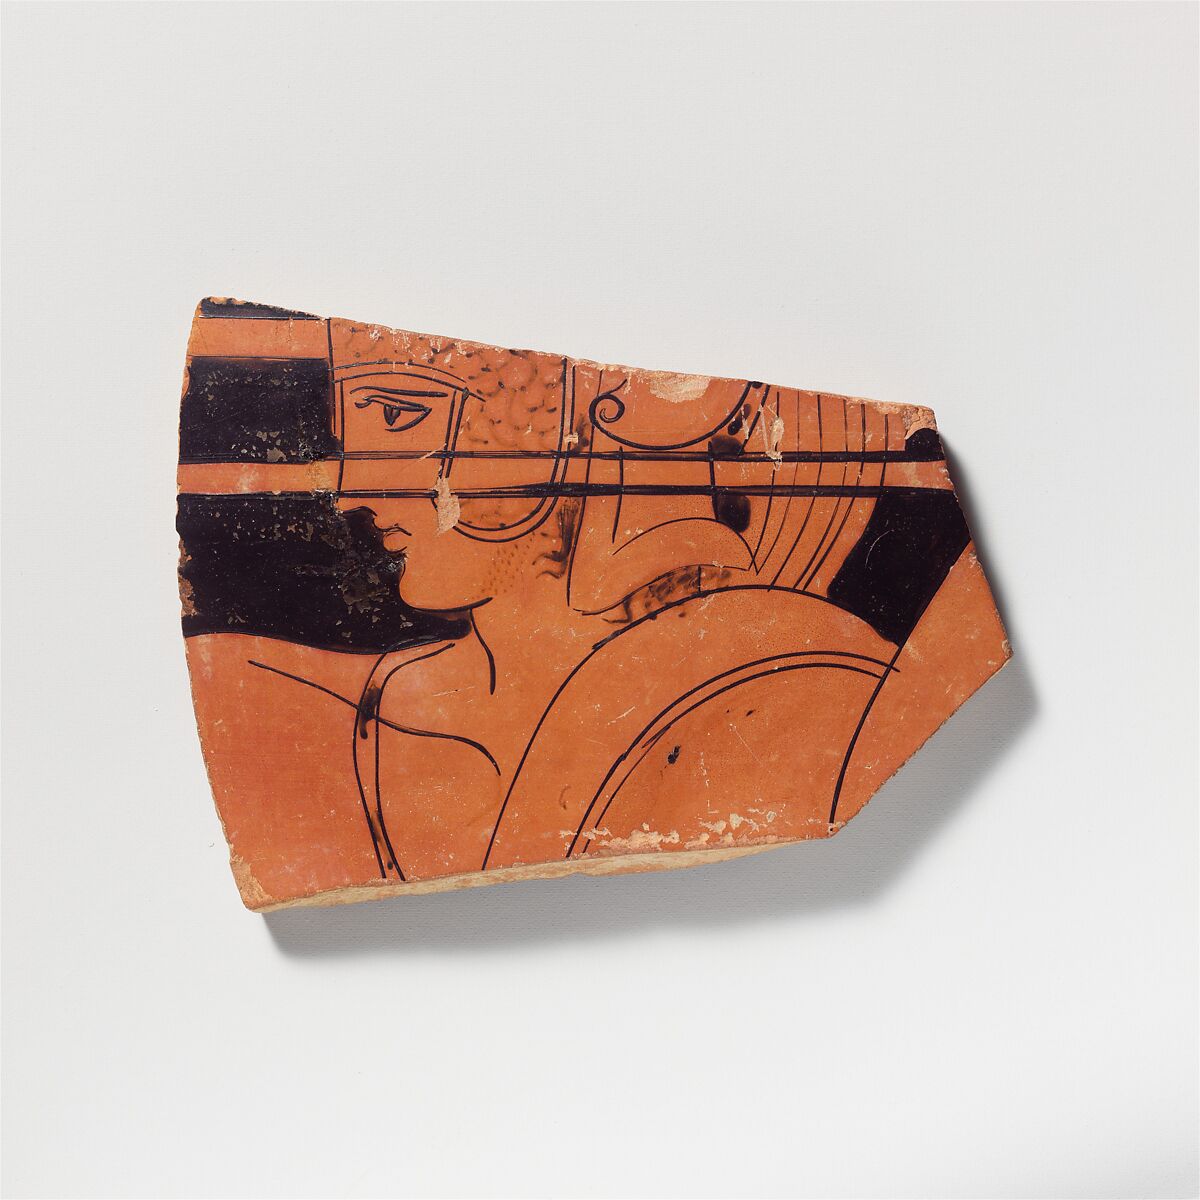 Terracotta sherd from a loutrophoros, Attributed to the Group of Polygnotos, Terracotta, Greek, Attic 